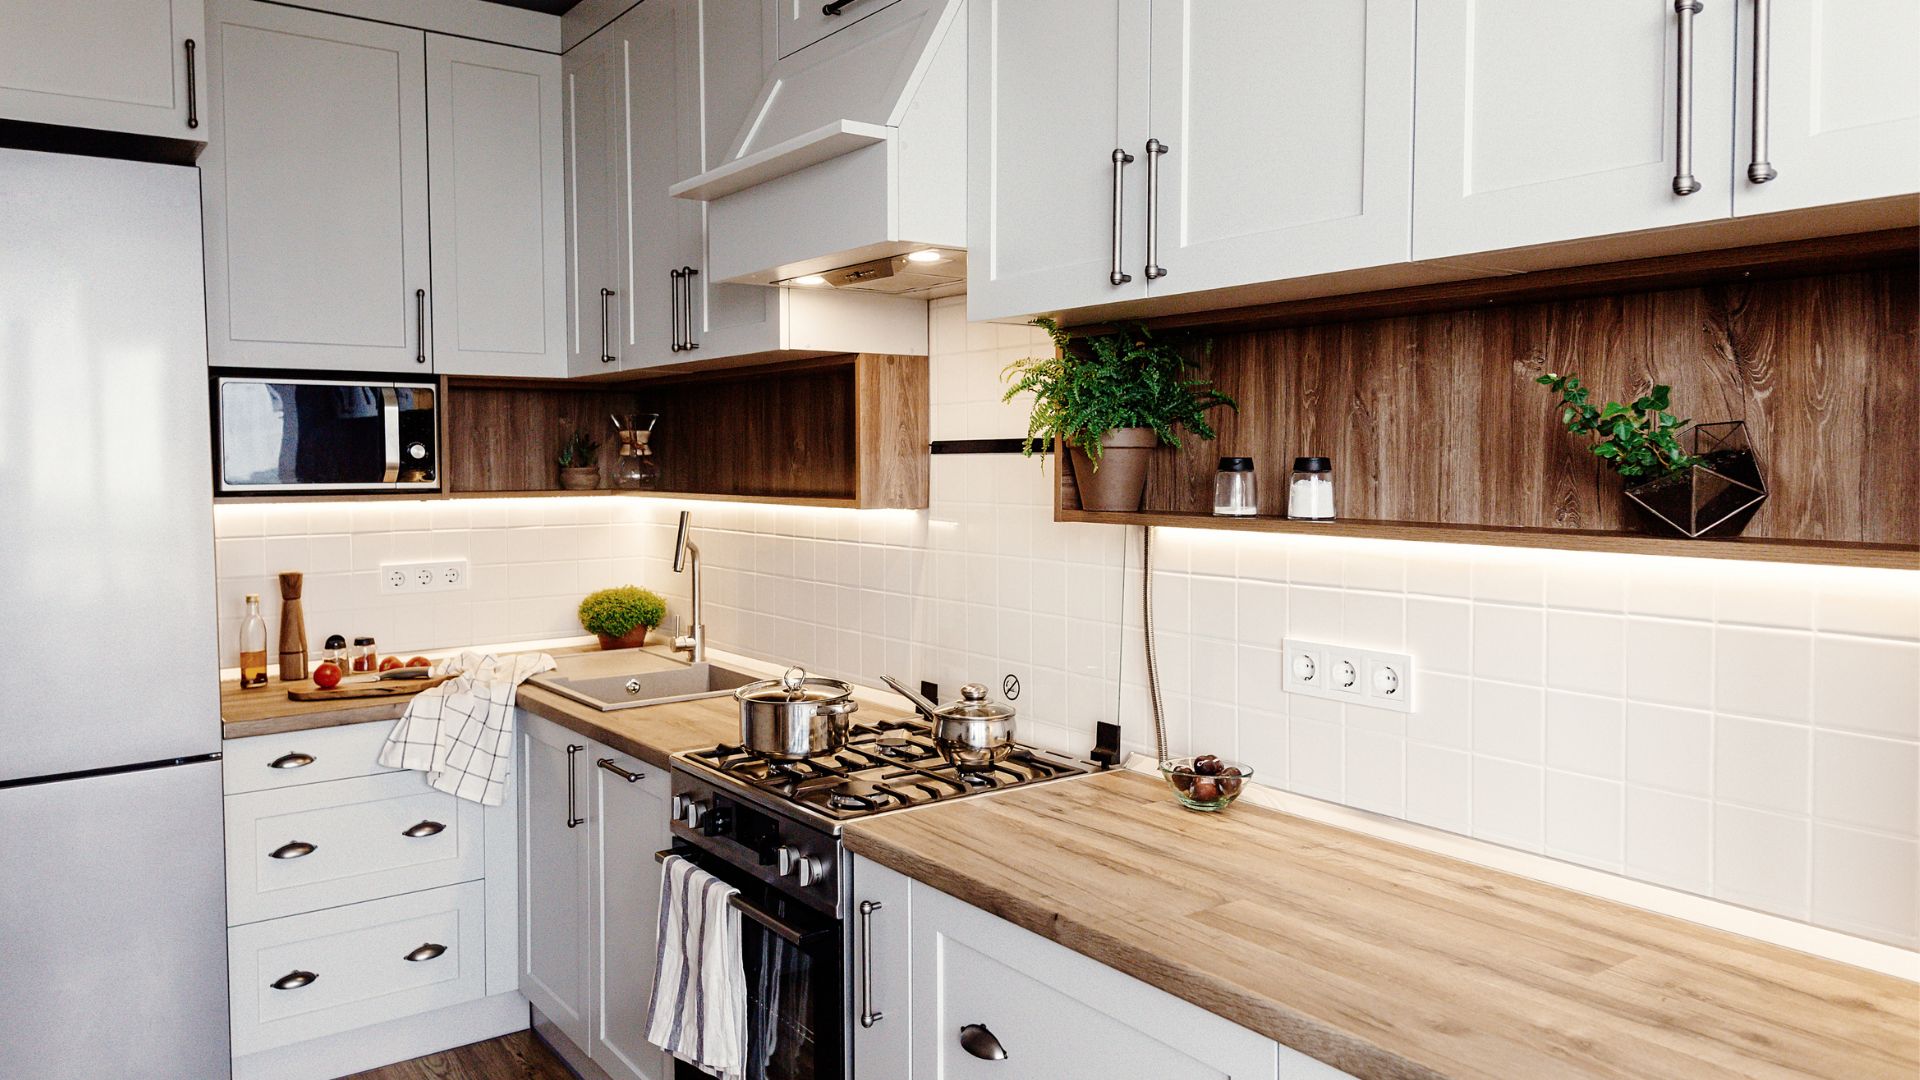 L type kitchen with white shaker cabinets and wood countertops